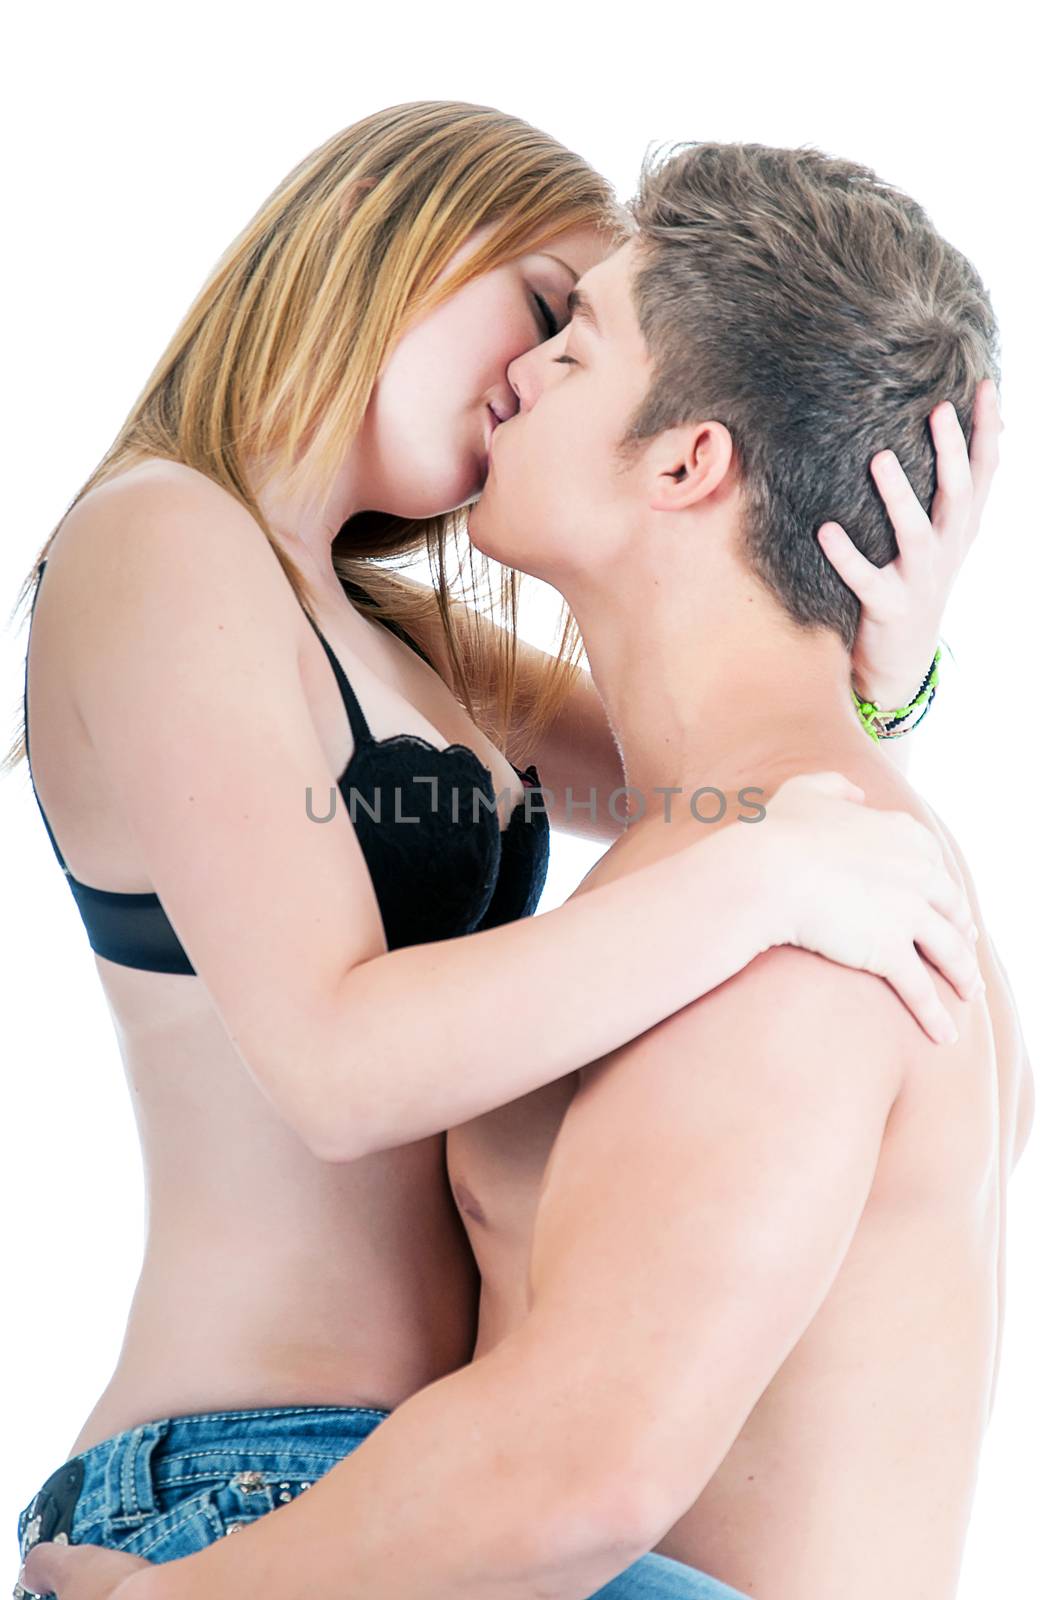 Young couple kissing while in a romantic embrace. Isolated on a white background